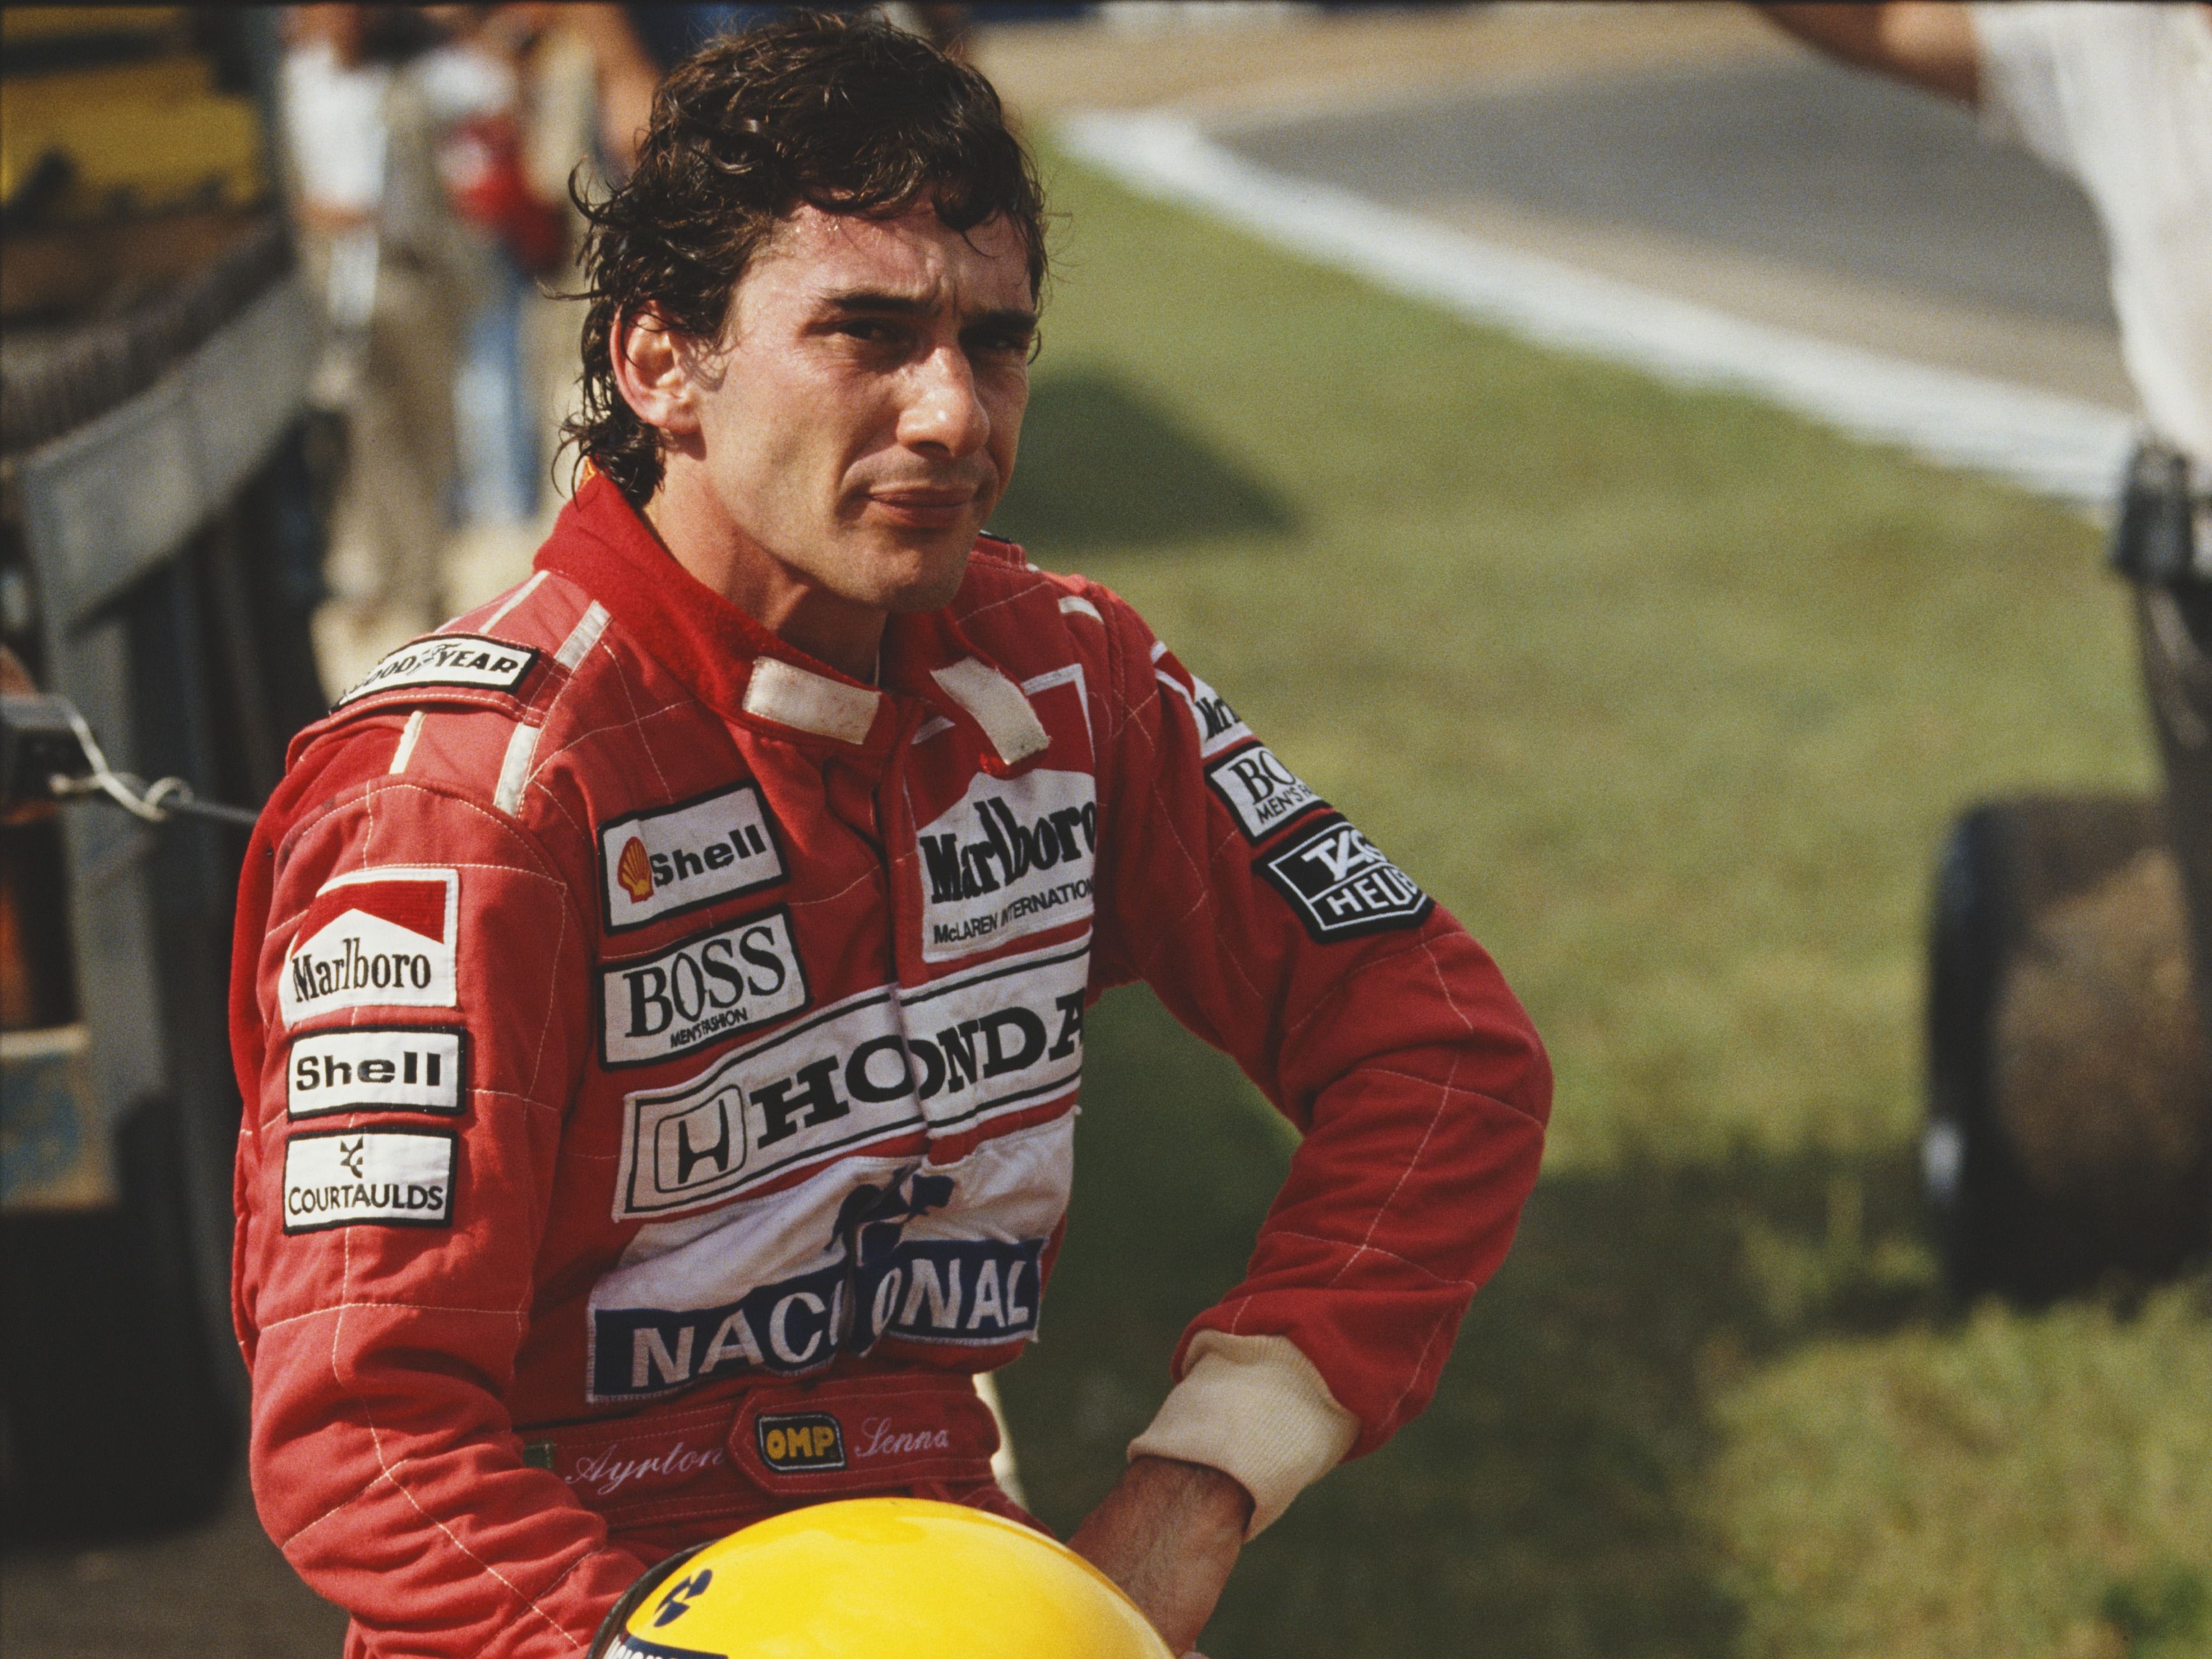 Ayrton Senna sits on a wall after retiring during the 1990 F1 Spanish Grand Prix. (Photo by Pascal Rondeau/Getty Images)